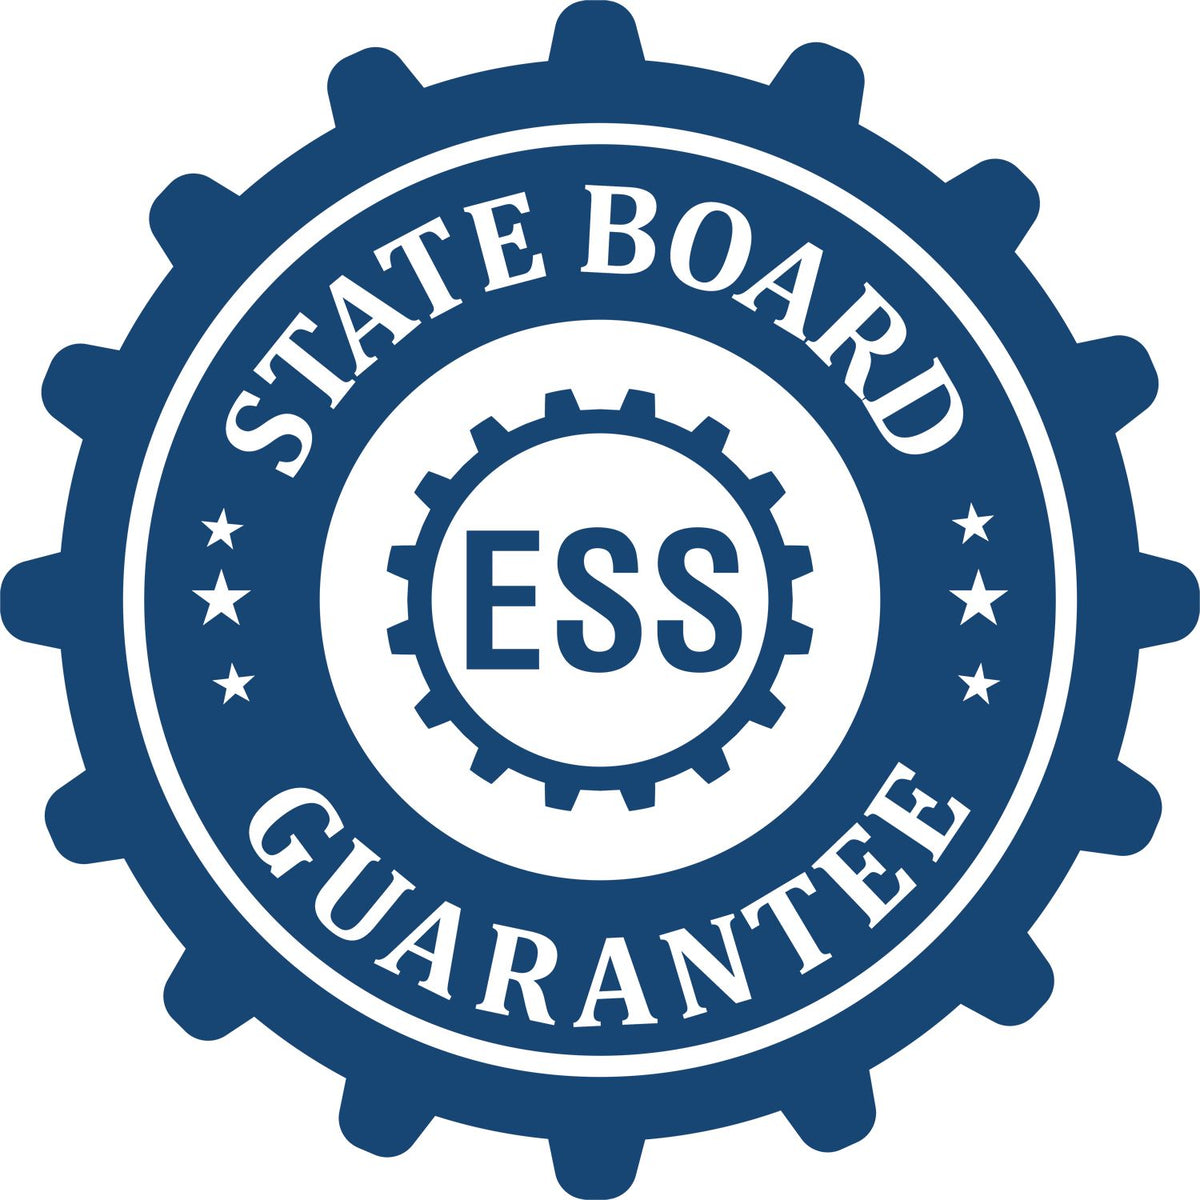 An emblem in a gear shape illustrating a state board guarantee for the Wooden Handle Arkansas Rectangular Notary Public Stamp product.